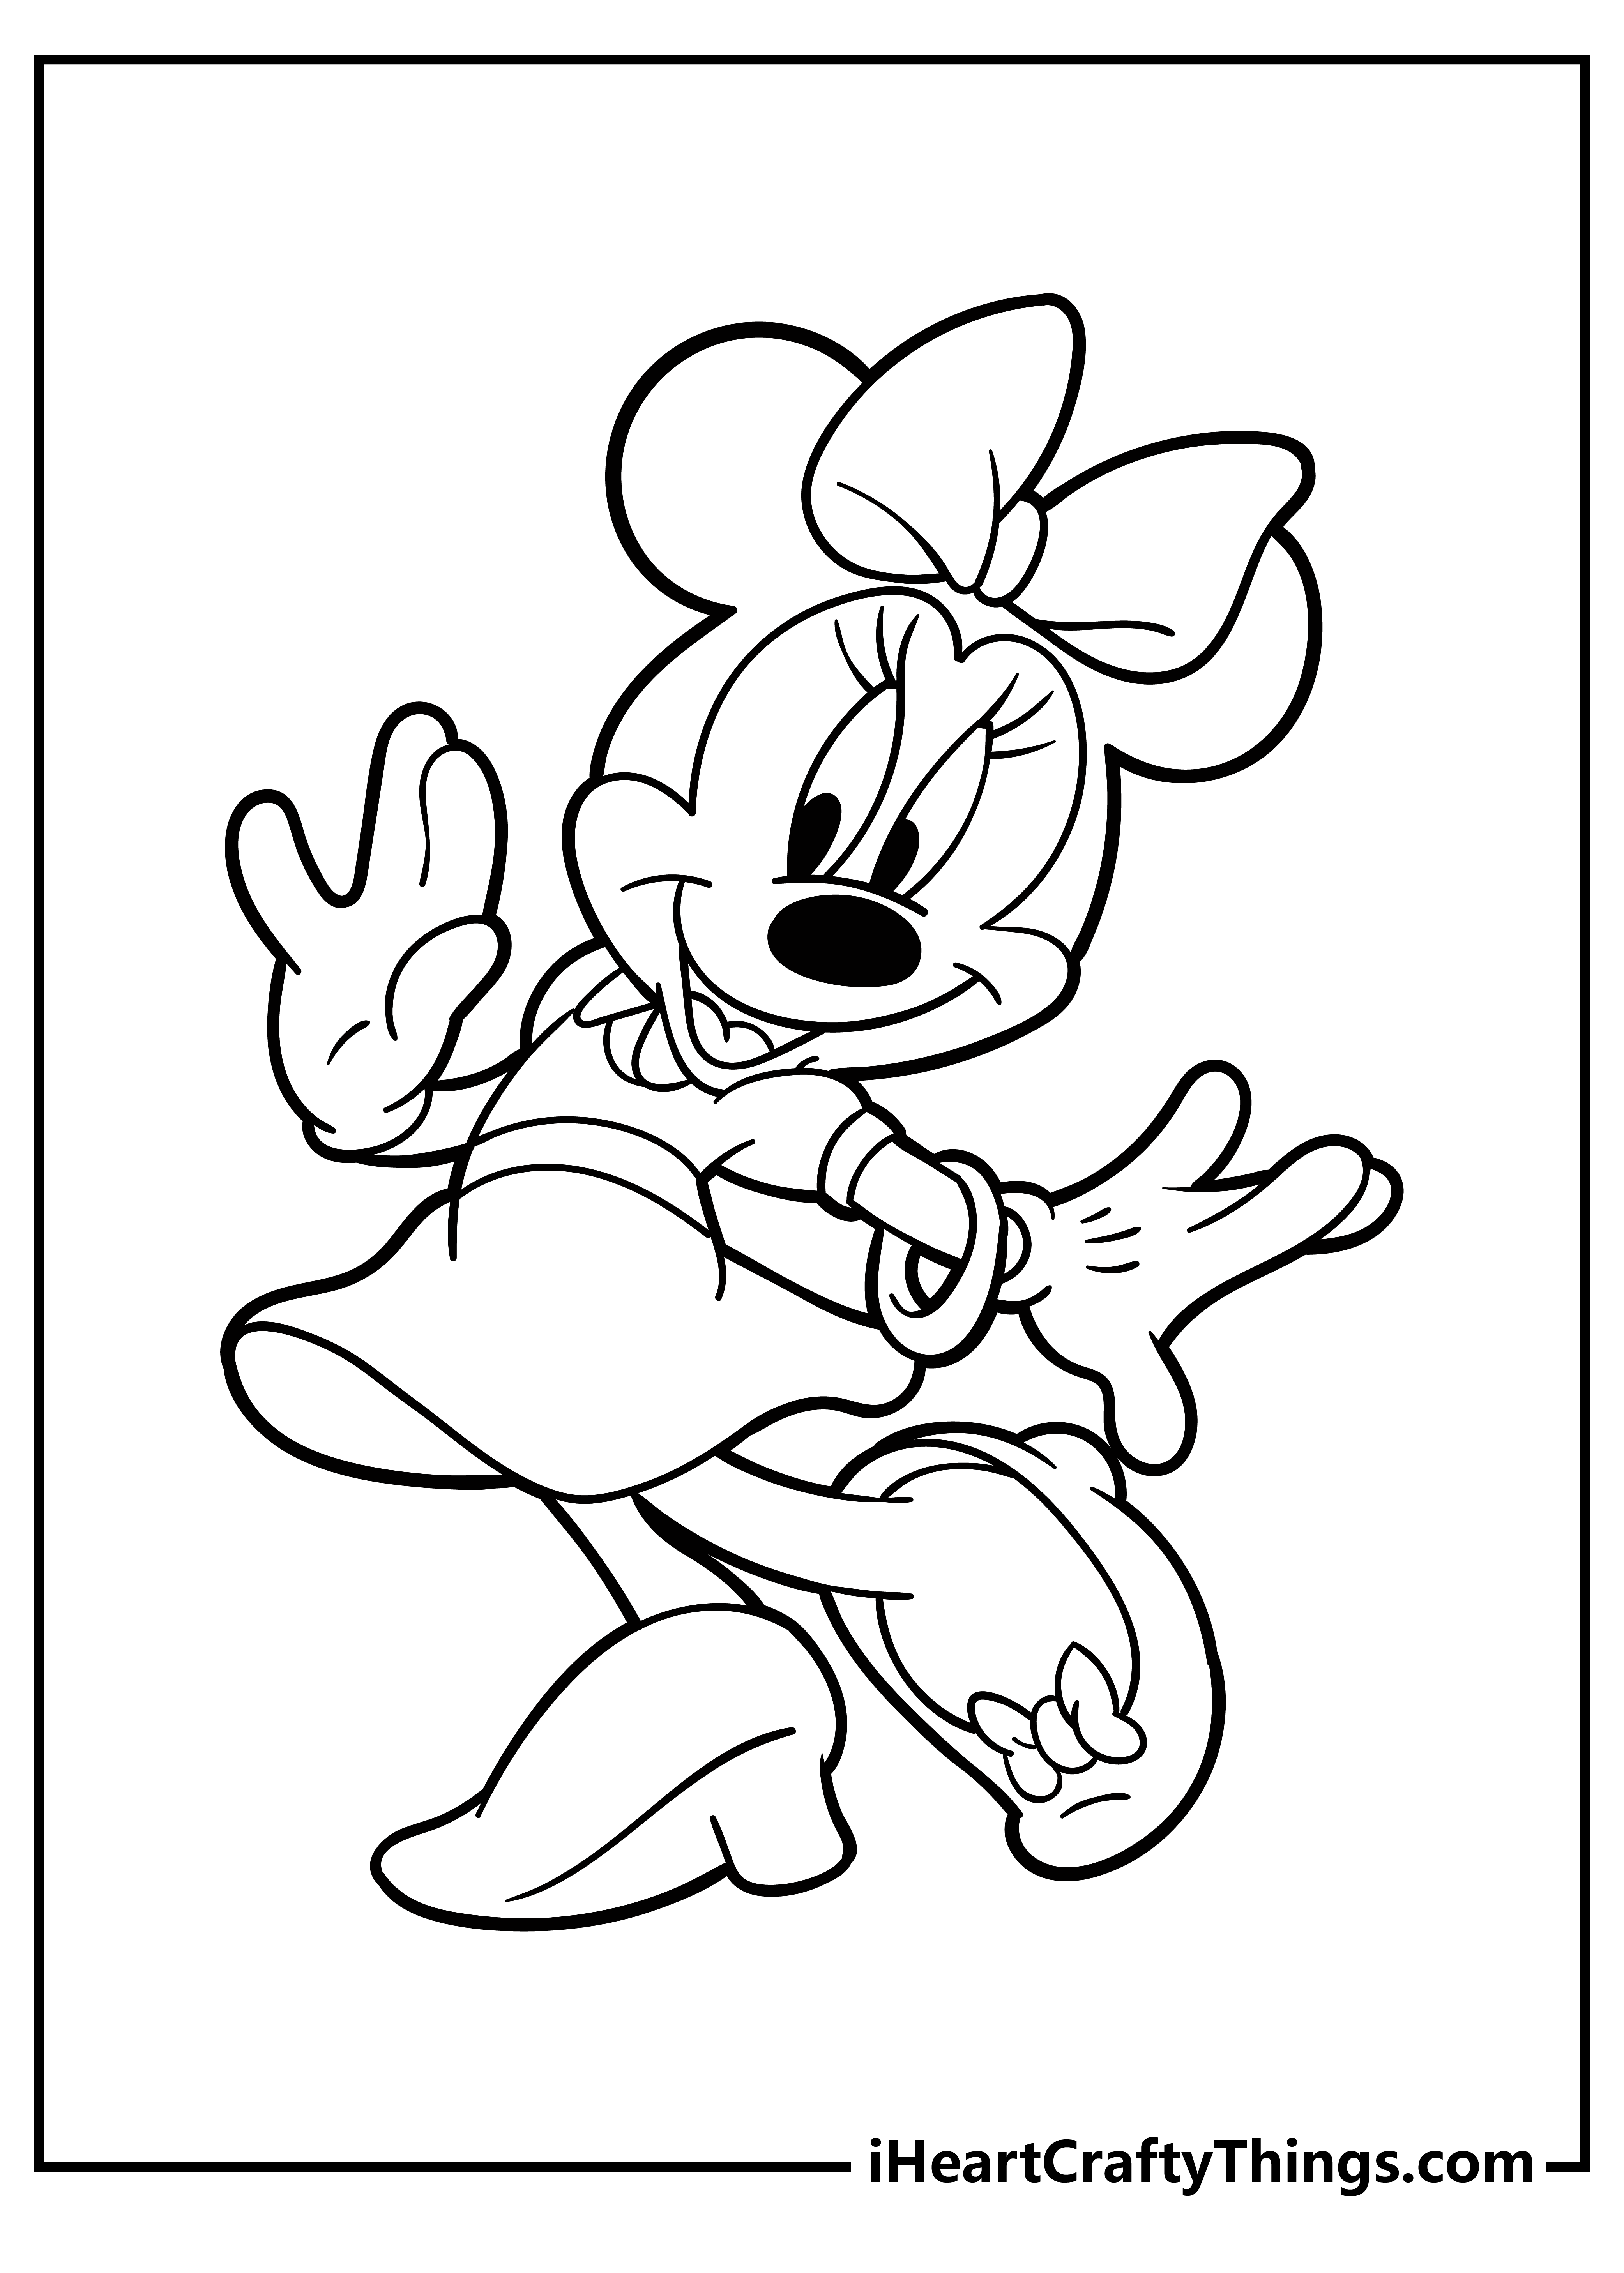 Minnie Mouse Coloring Pages for preschoolers free printable